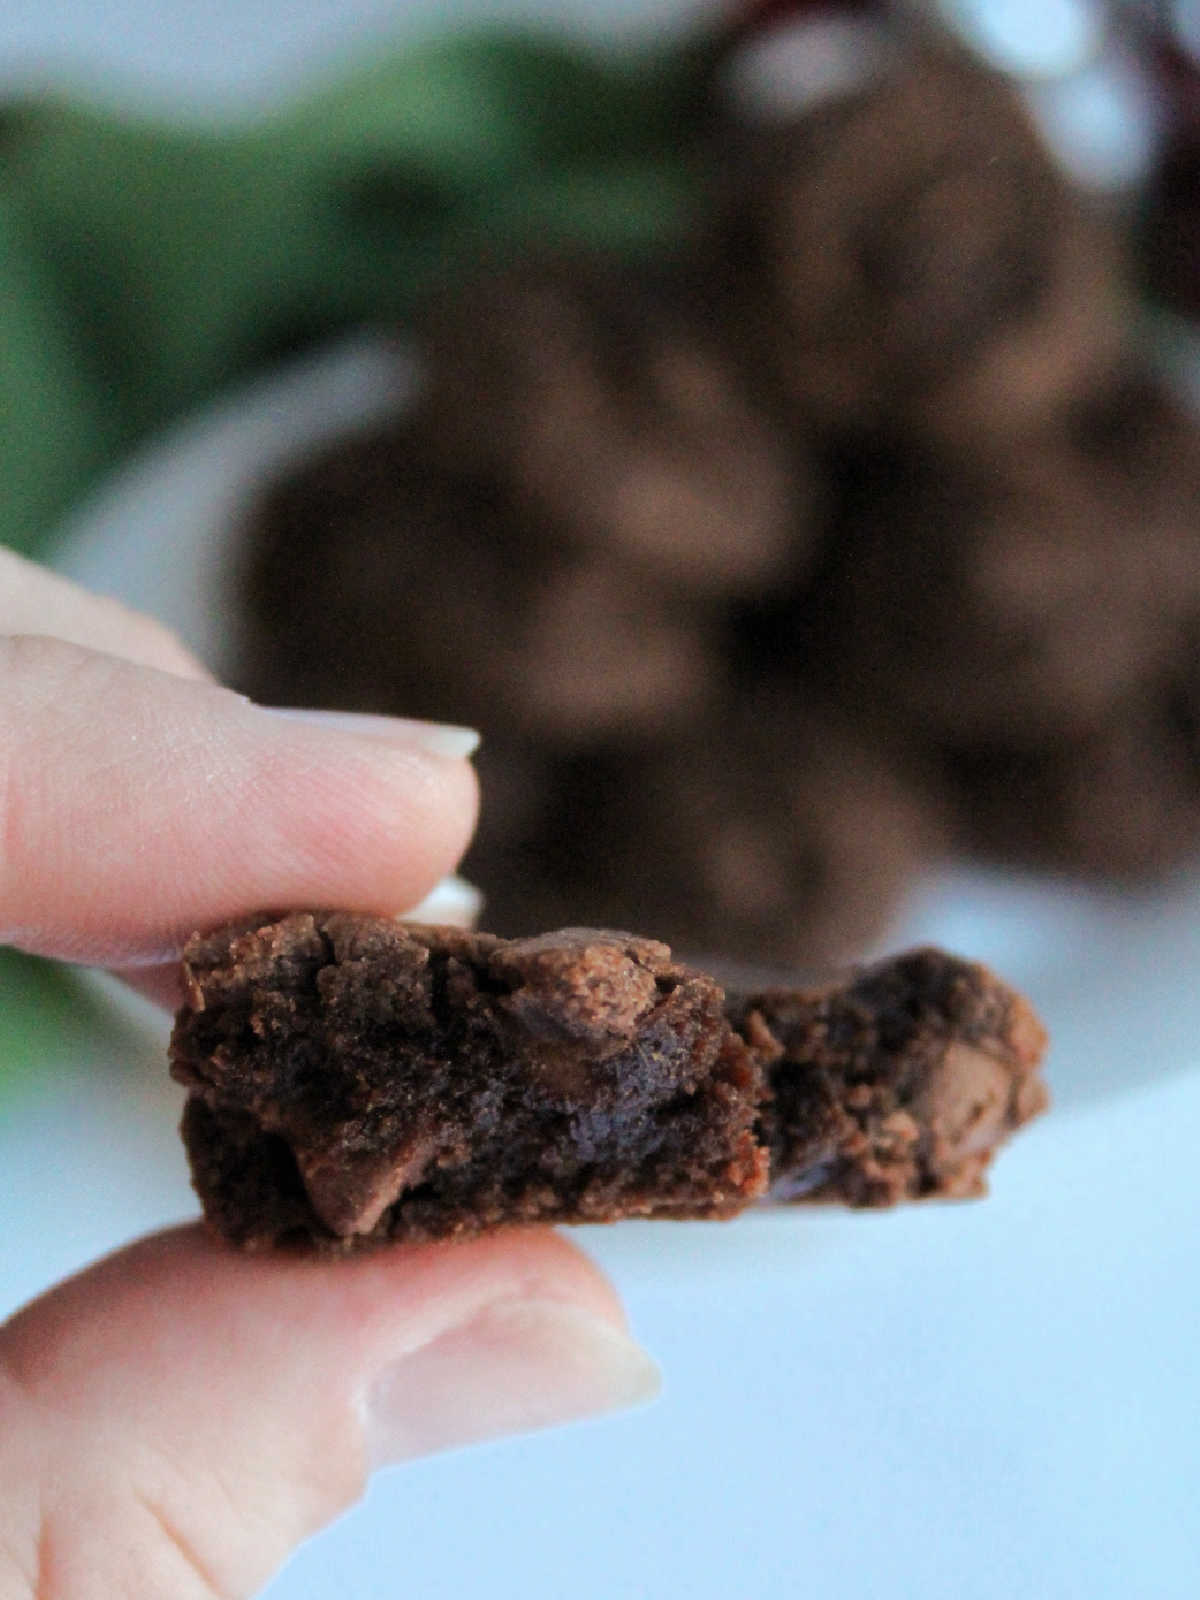 Hand holding half of a brownie mix cookie showing the rich fudgy interior and melted chocolate chips.